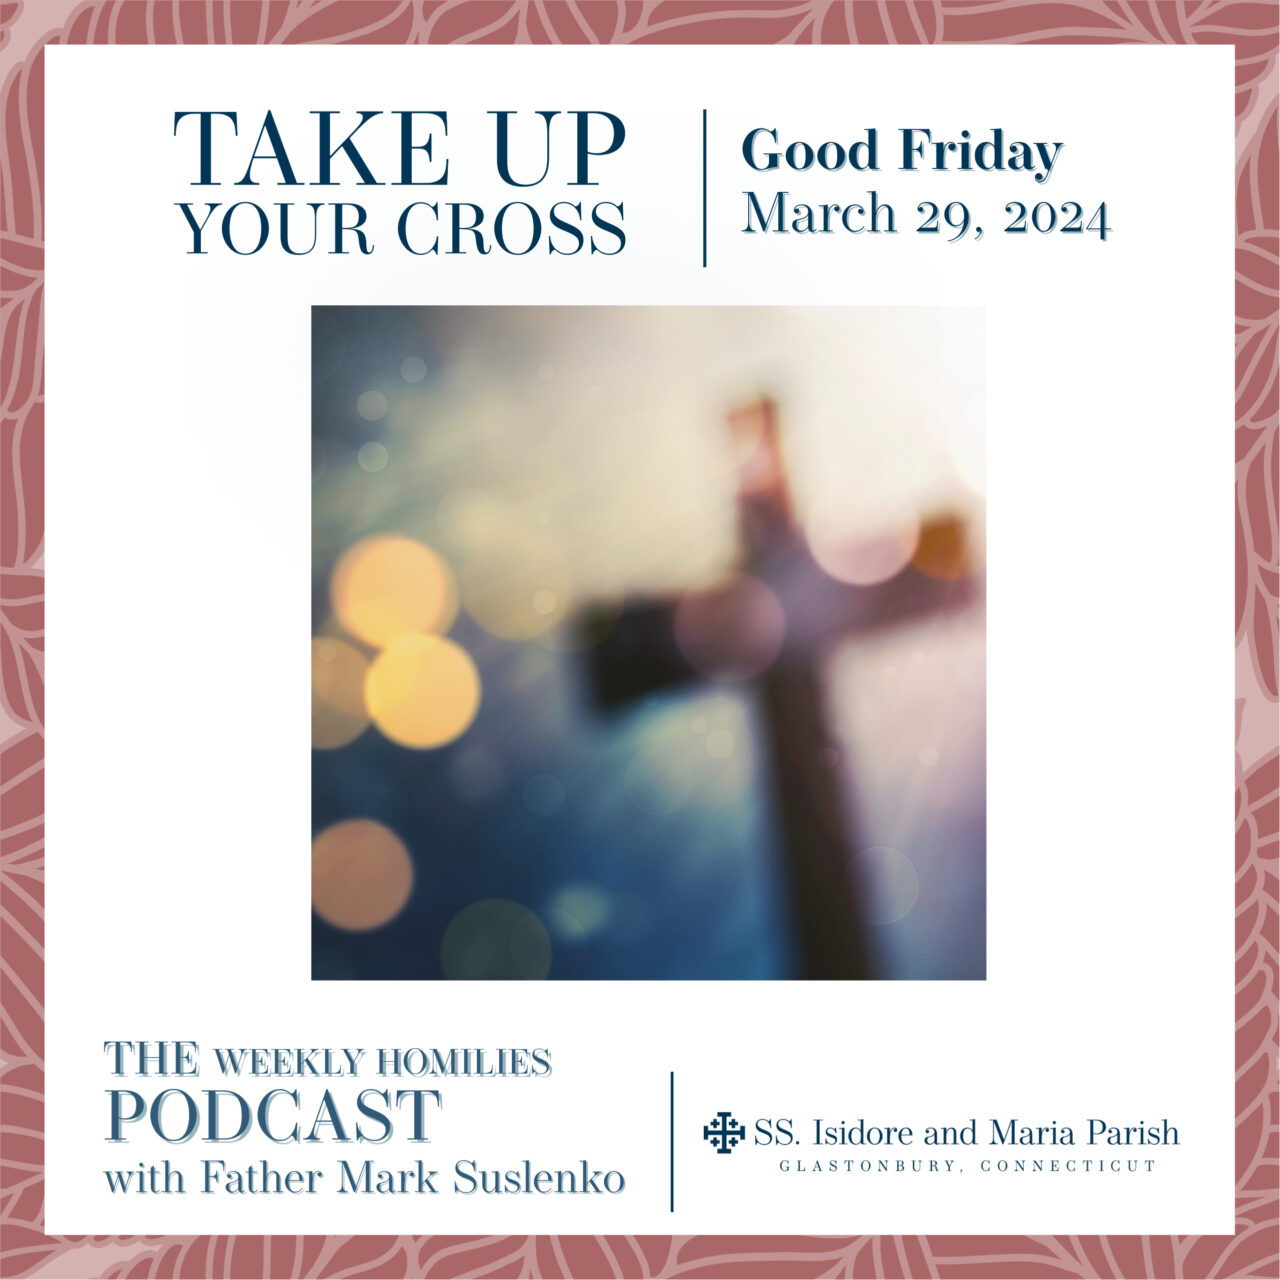 PODCAST: Take Up Your Cross